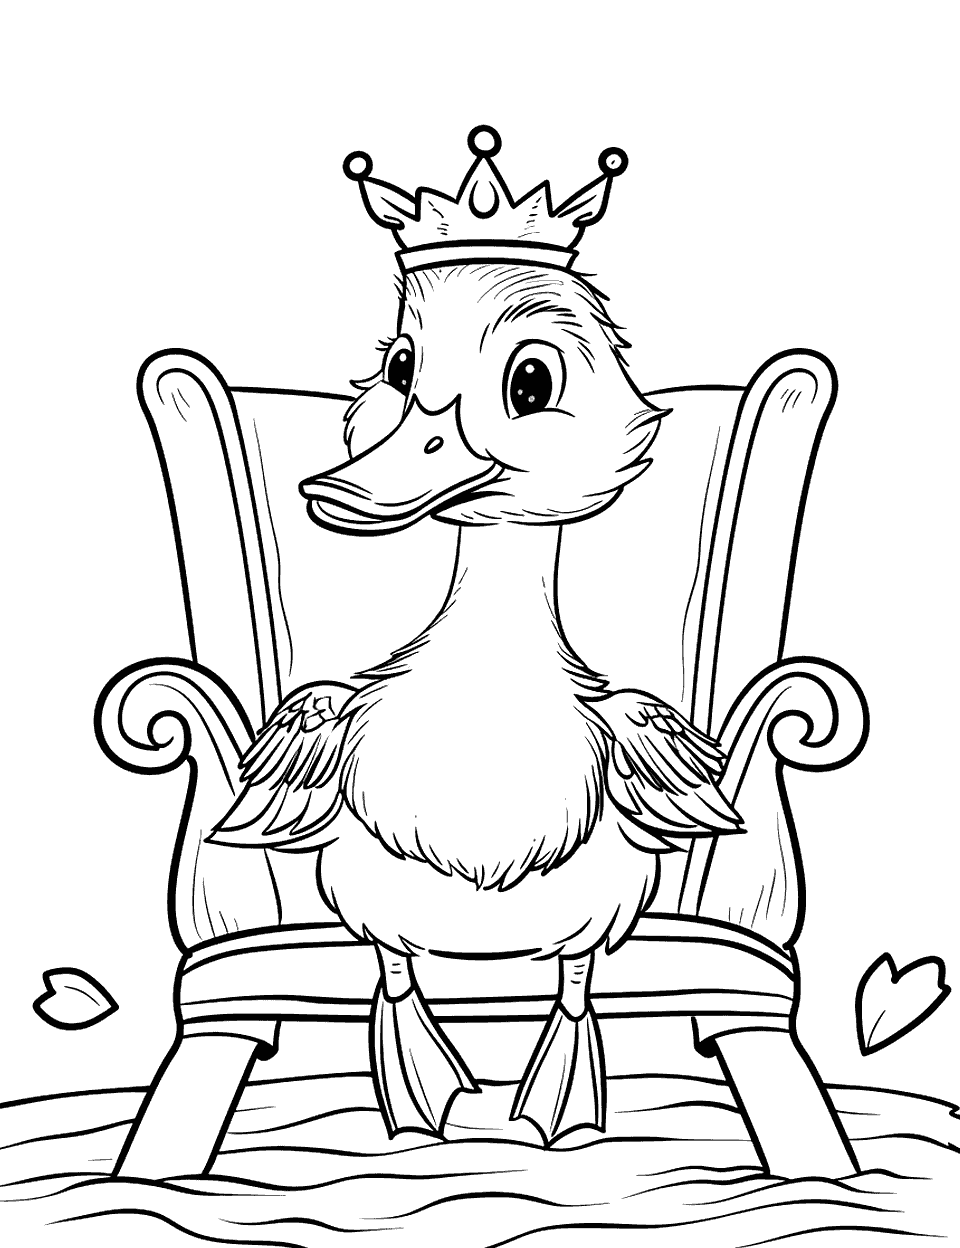 Duck Wearing a Crown Coloring Page - A royal duck wearing a crown, sitting on a throne like a king or queen.